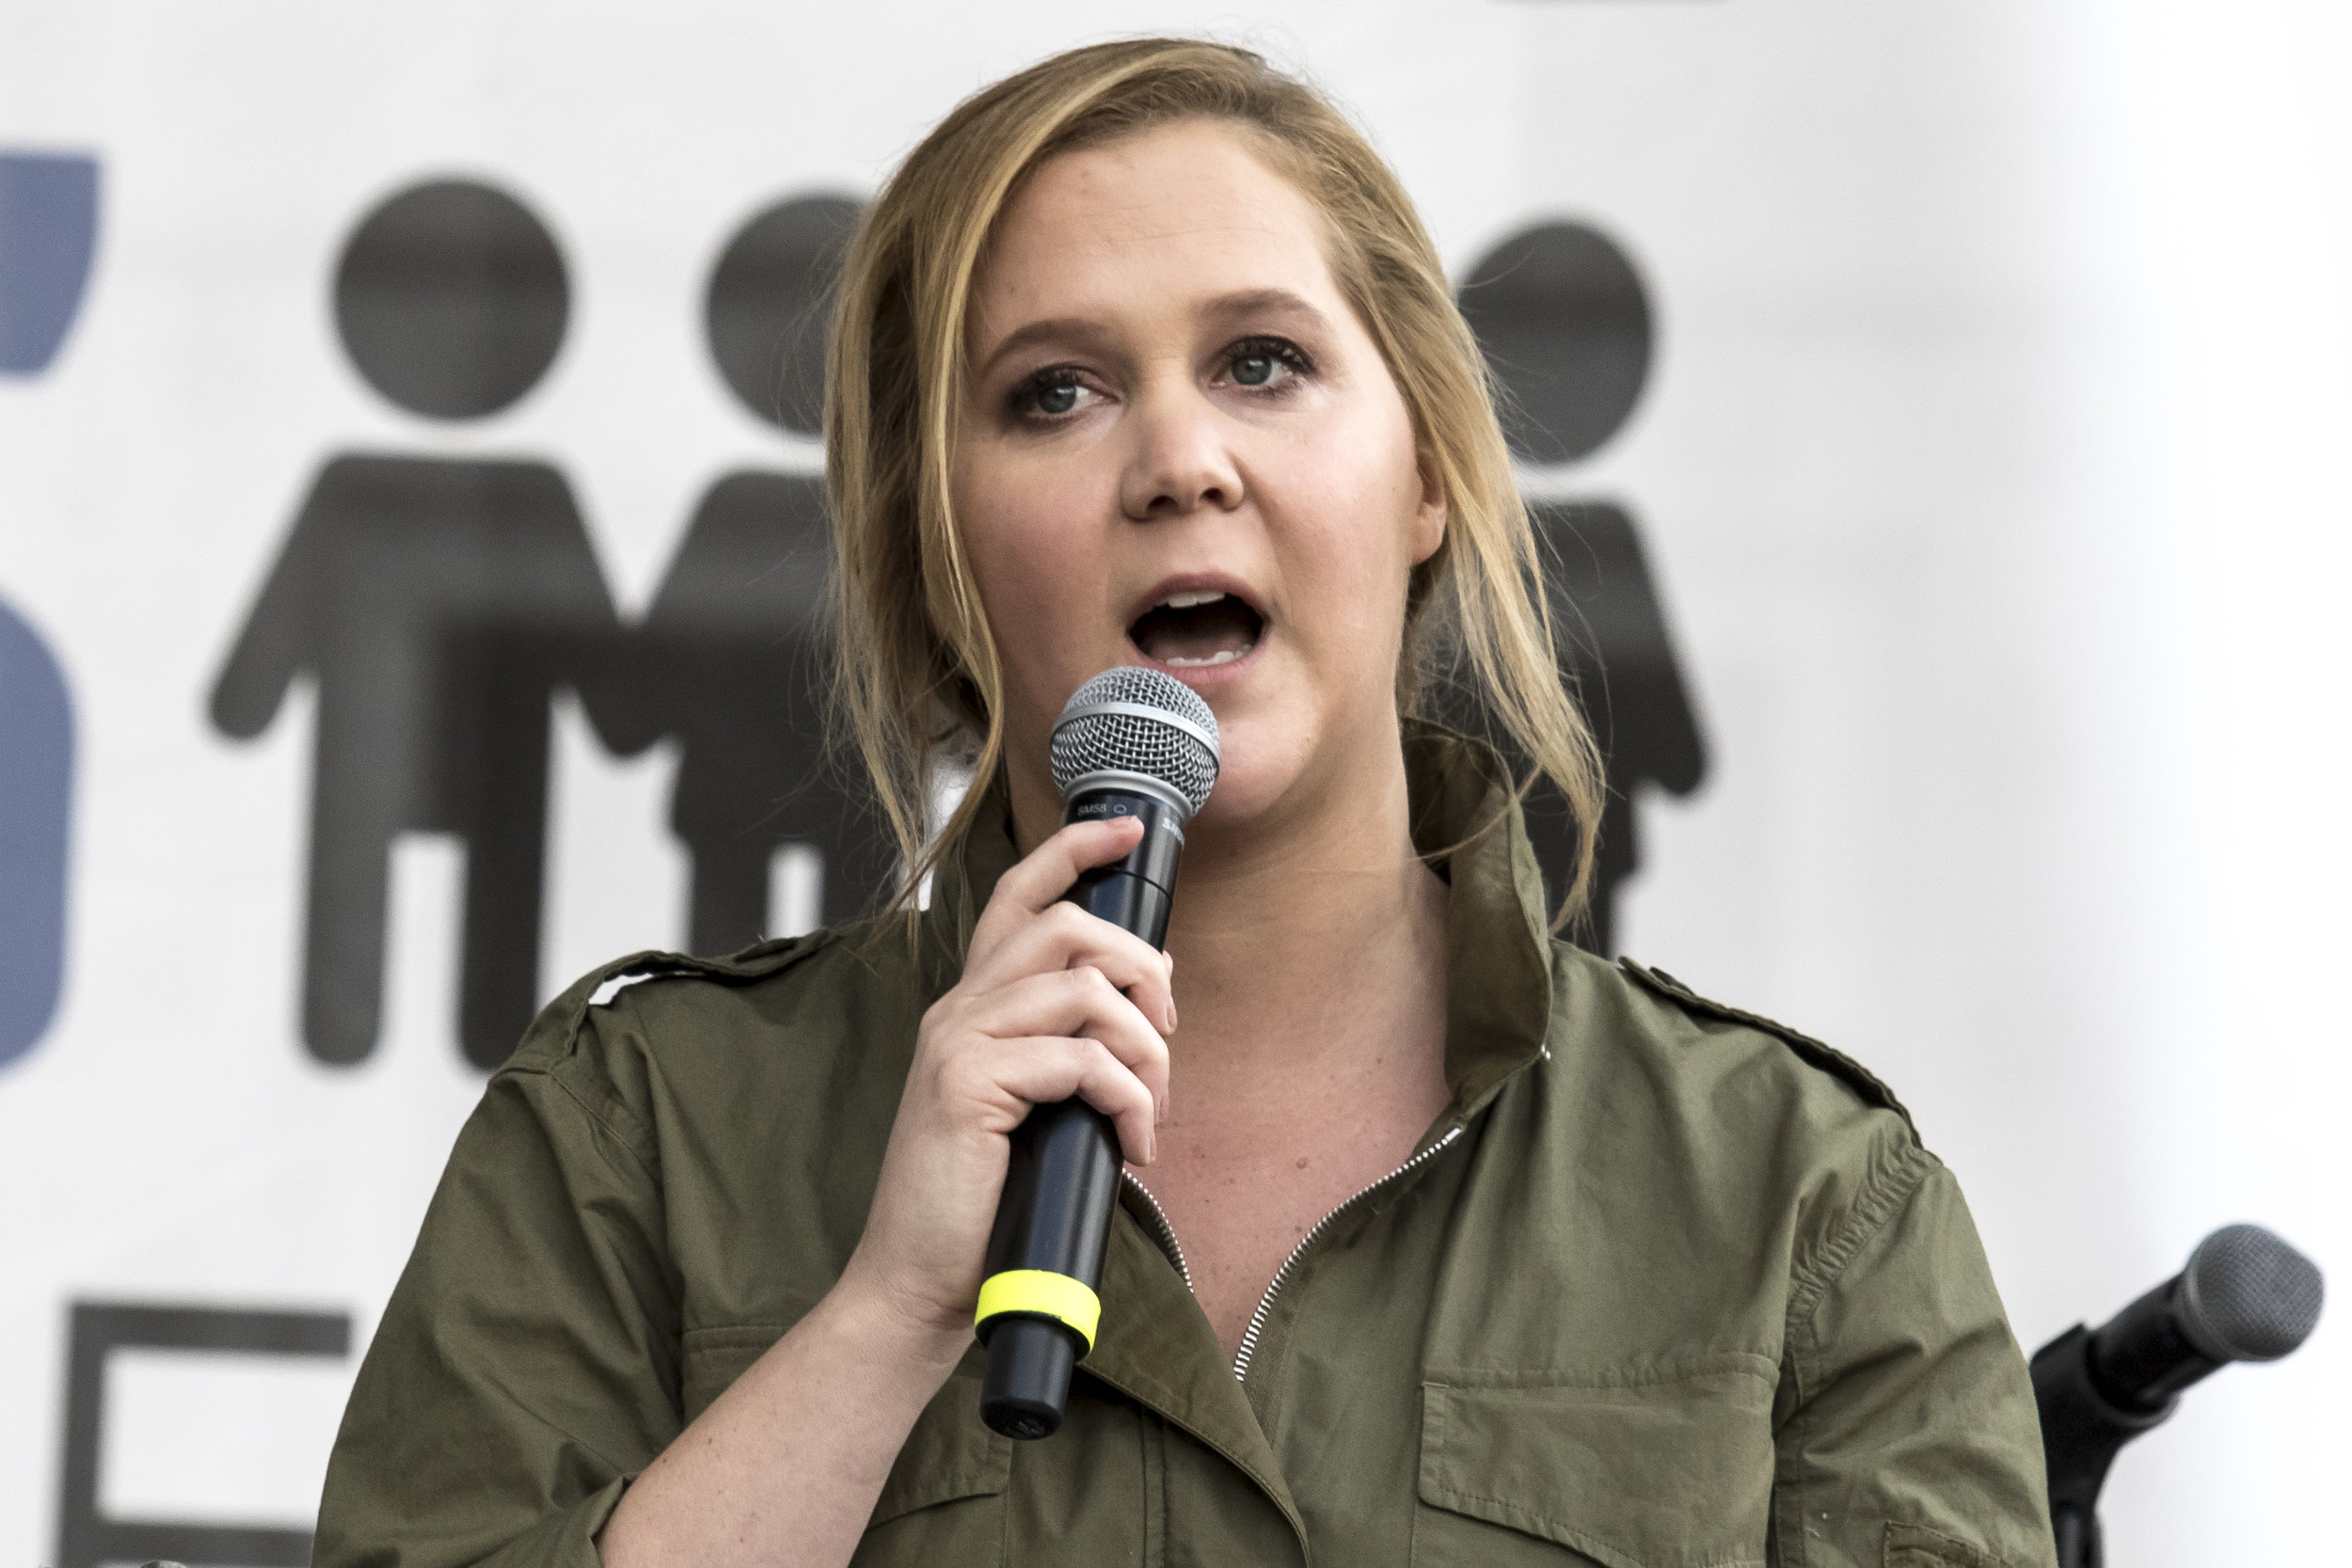  Amy Schumer was one of the many celebrity speakers at the March For Our Lives protest on March 24, 2018 in Los Angeles, California. (Zane Meyer-Thornton/Corsair Photo) 